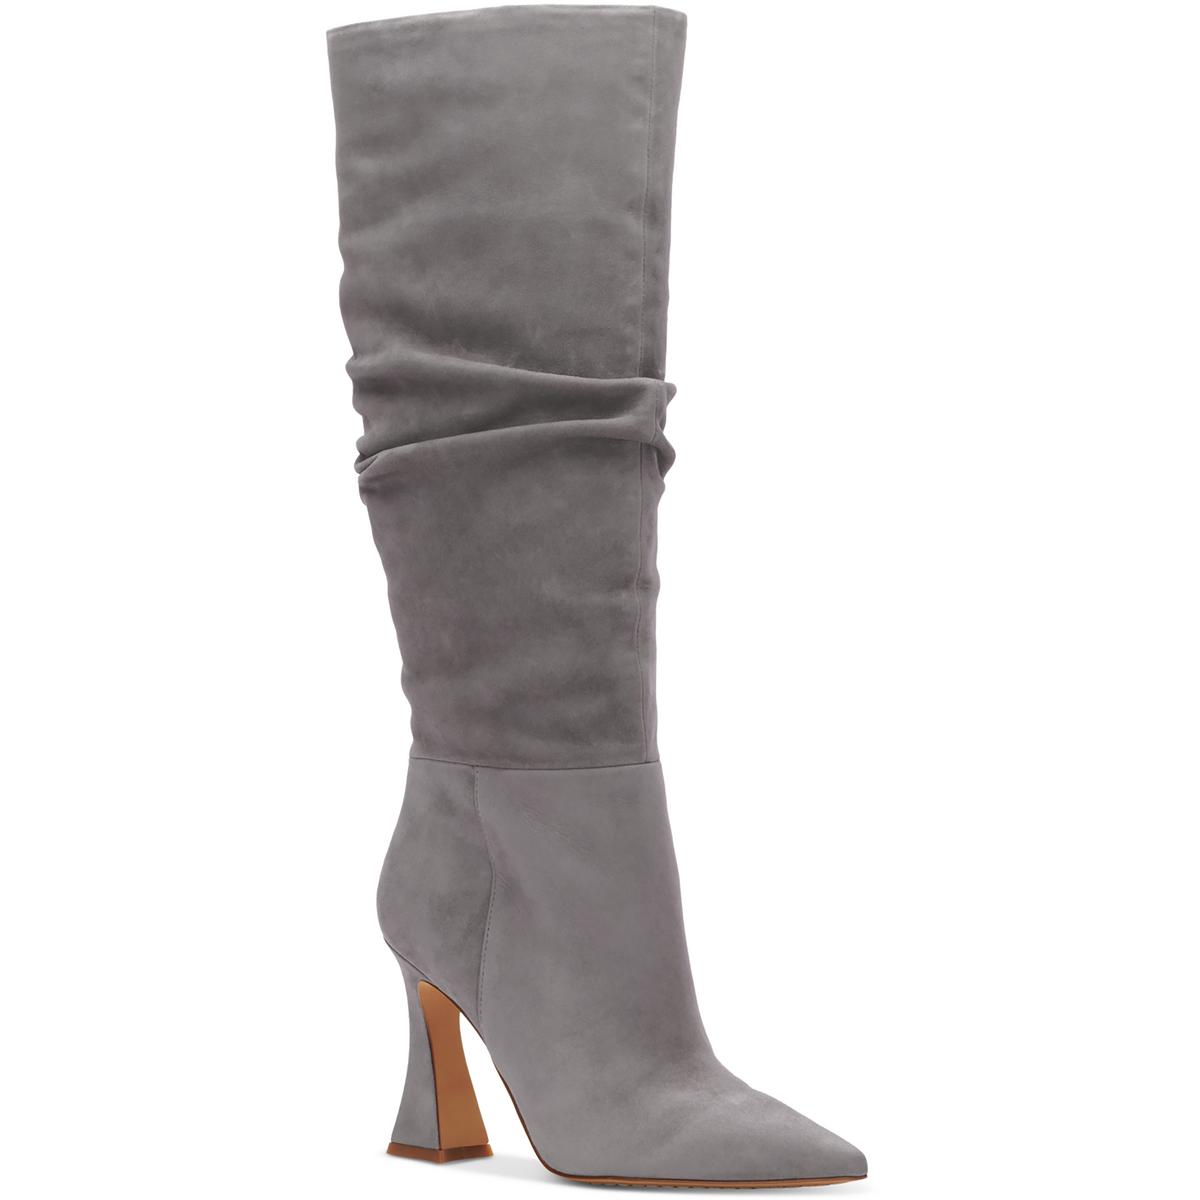 Vince Camuto Womens Alinkay Zipper Slouchy Knee-High Boots Shoes BHFO 6849